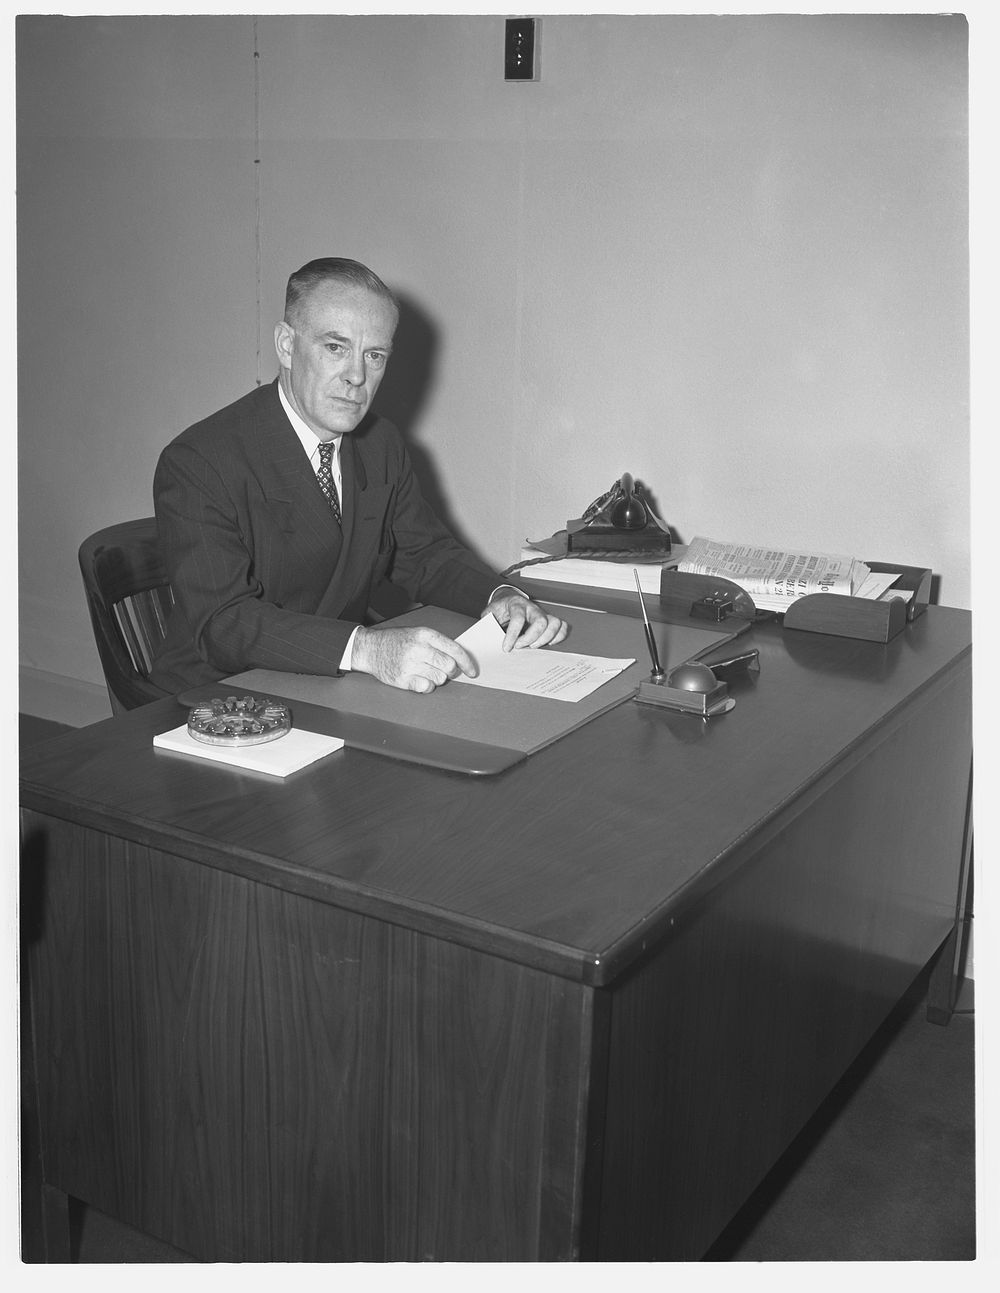 Roy Jackson, former administrative officer for Office of Production Management (OPM). Sourced from the Library of Congress.